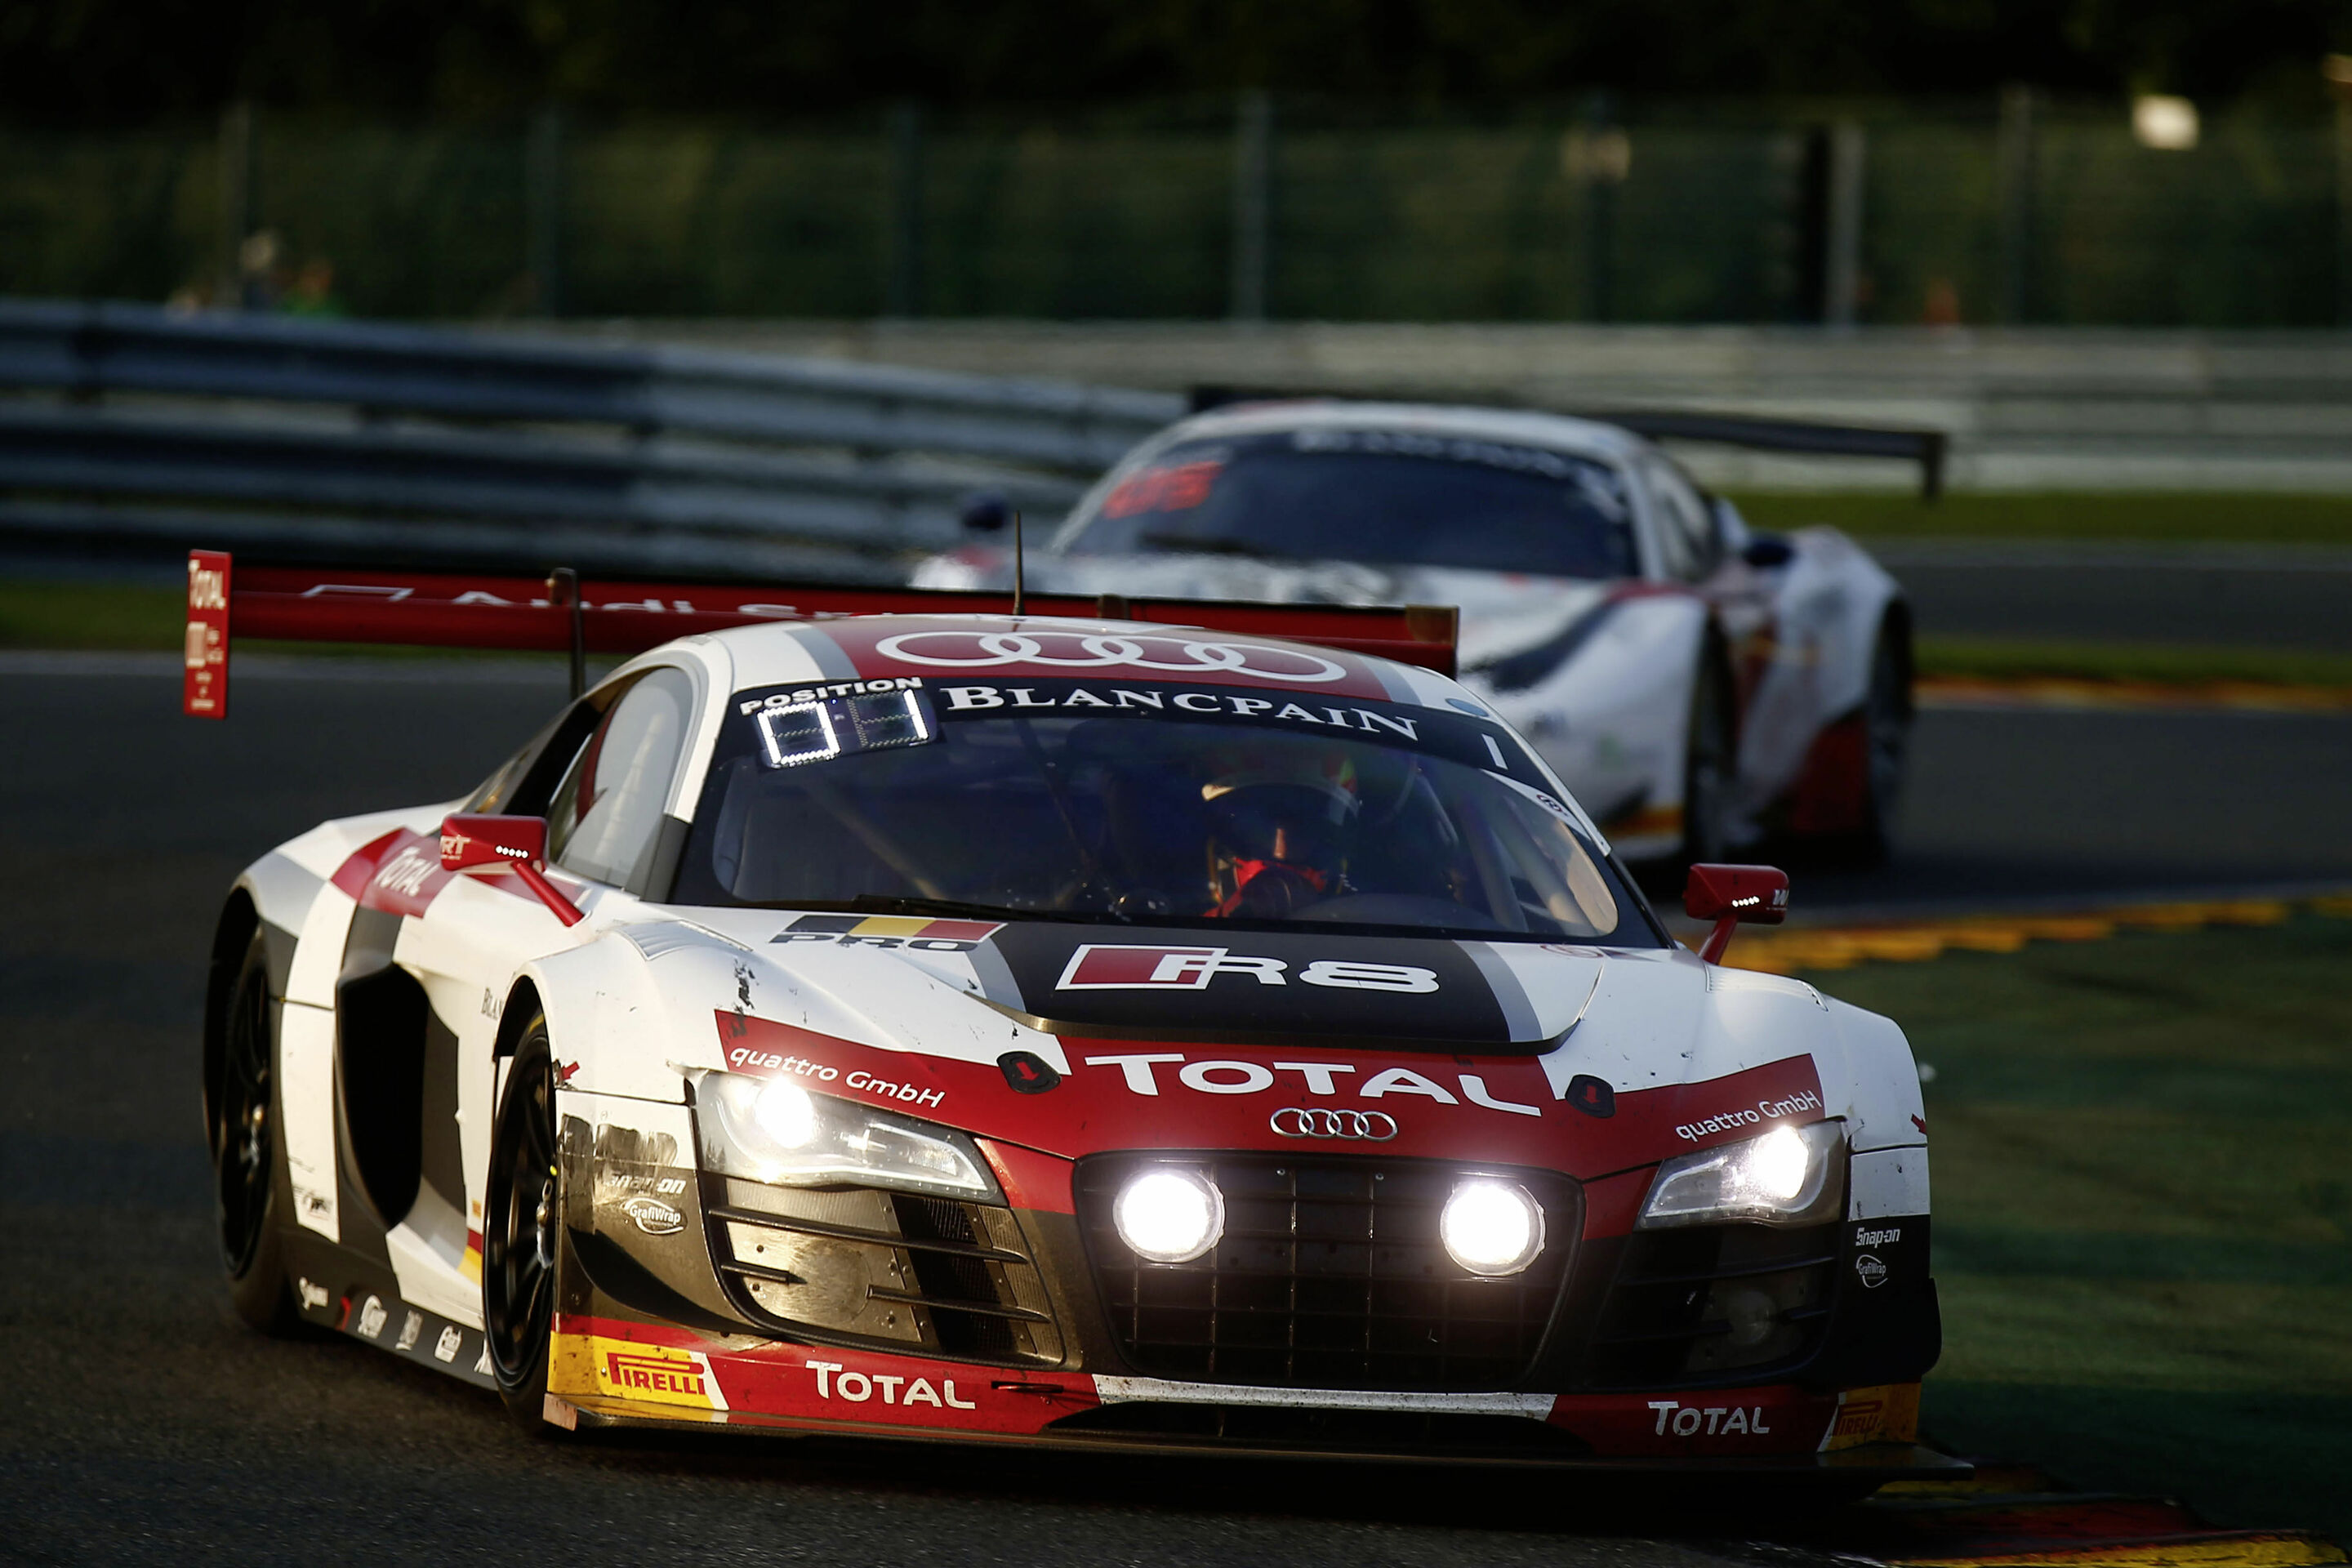 Third Audi victory in Spa 24 Hours